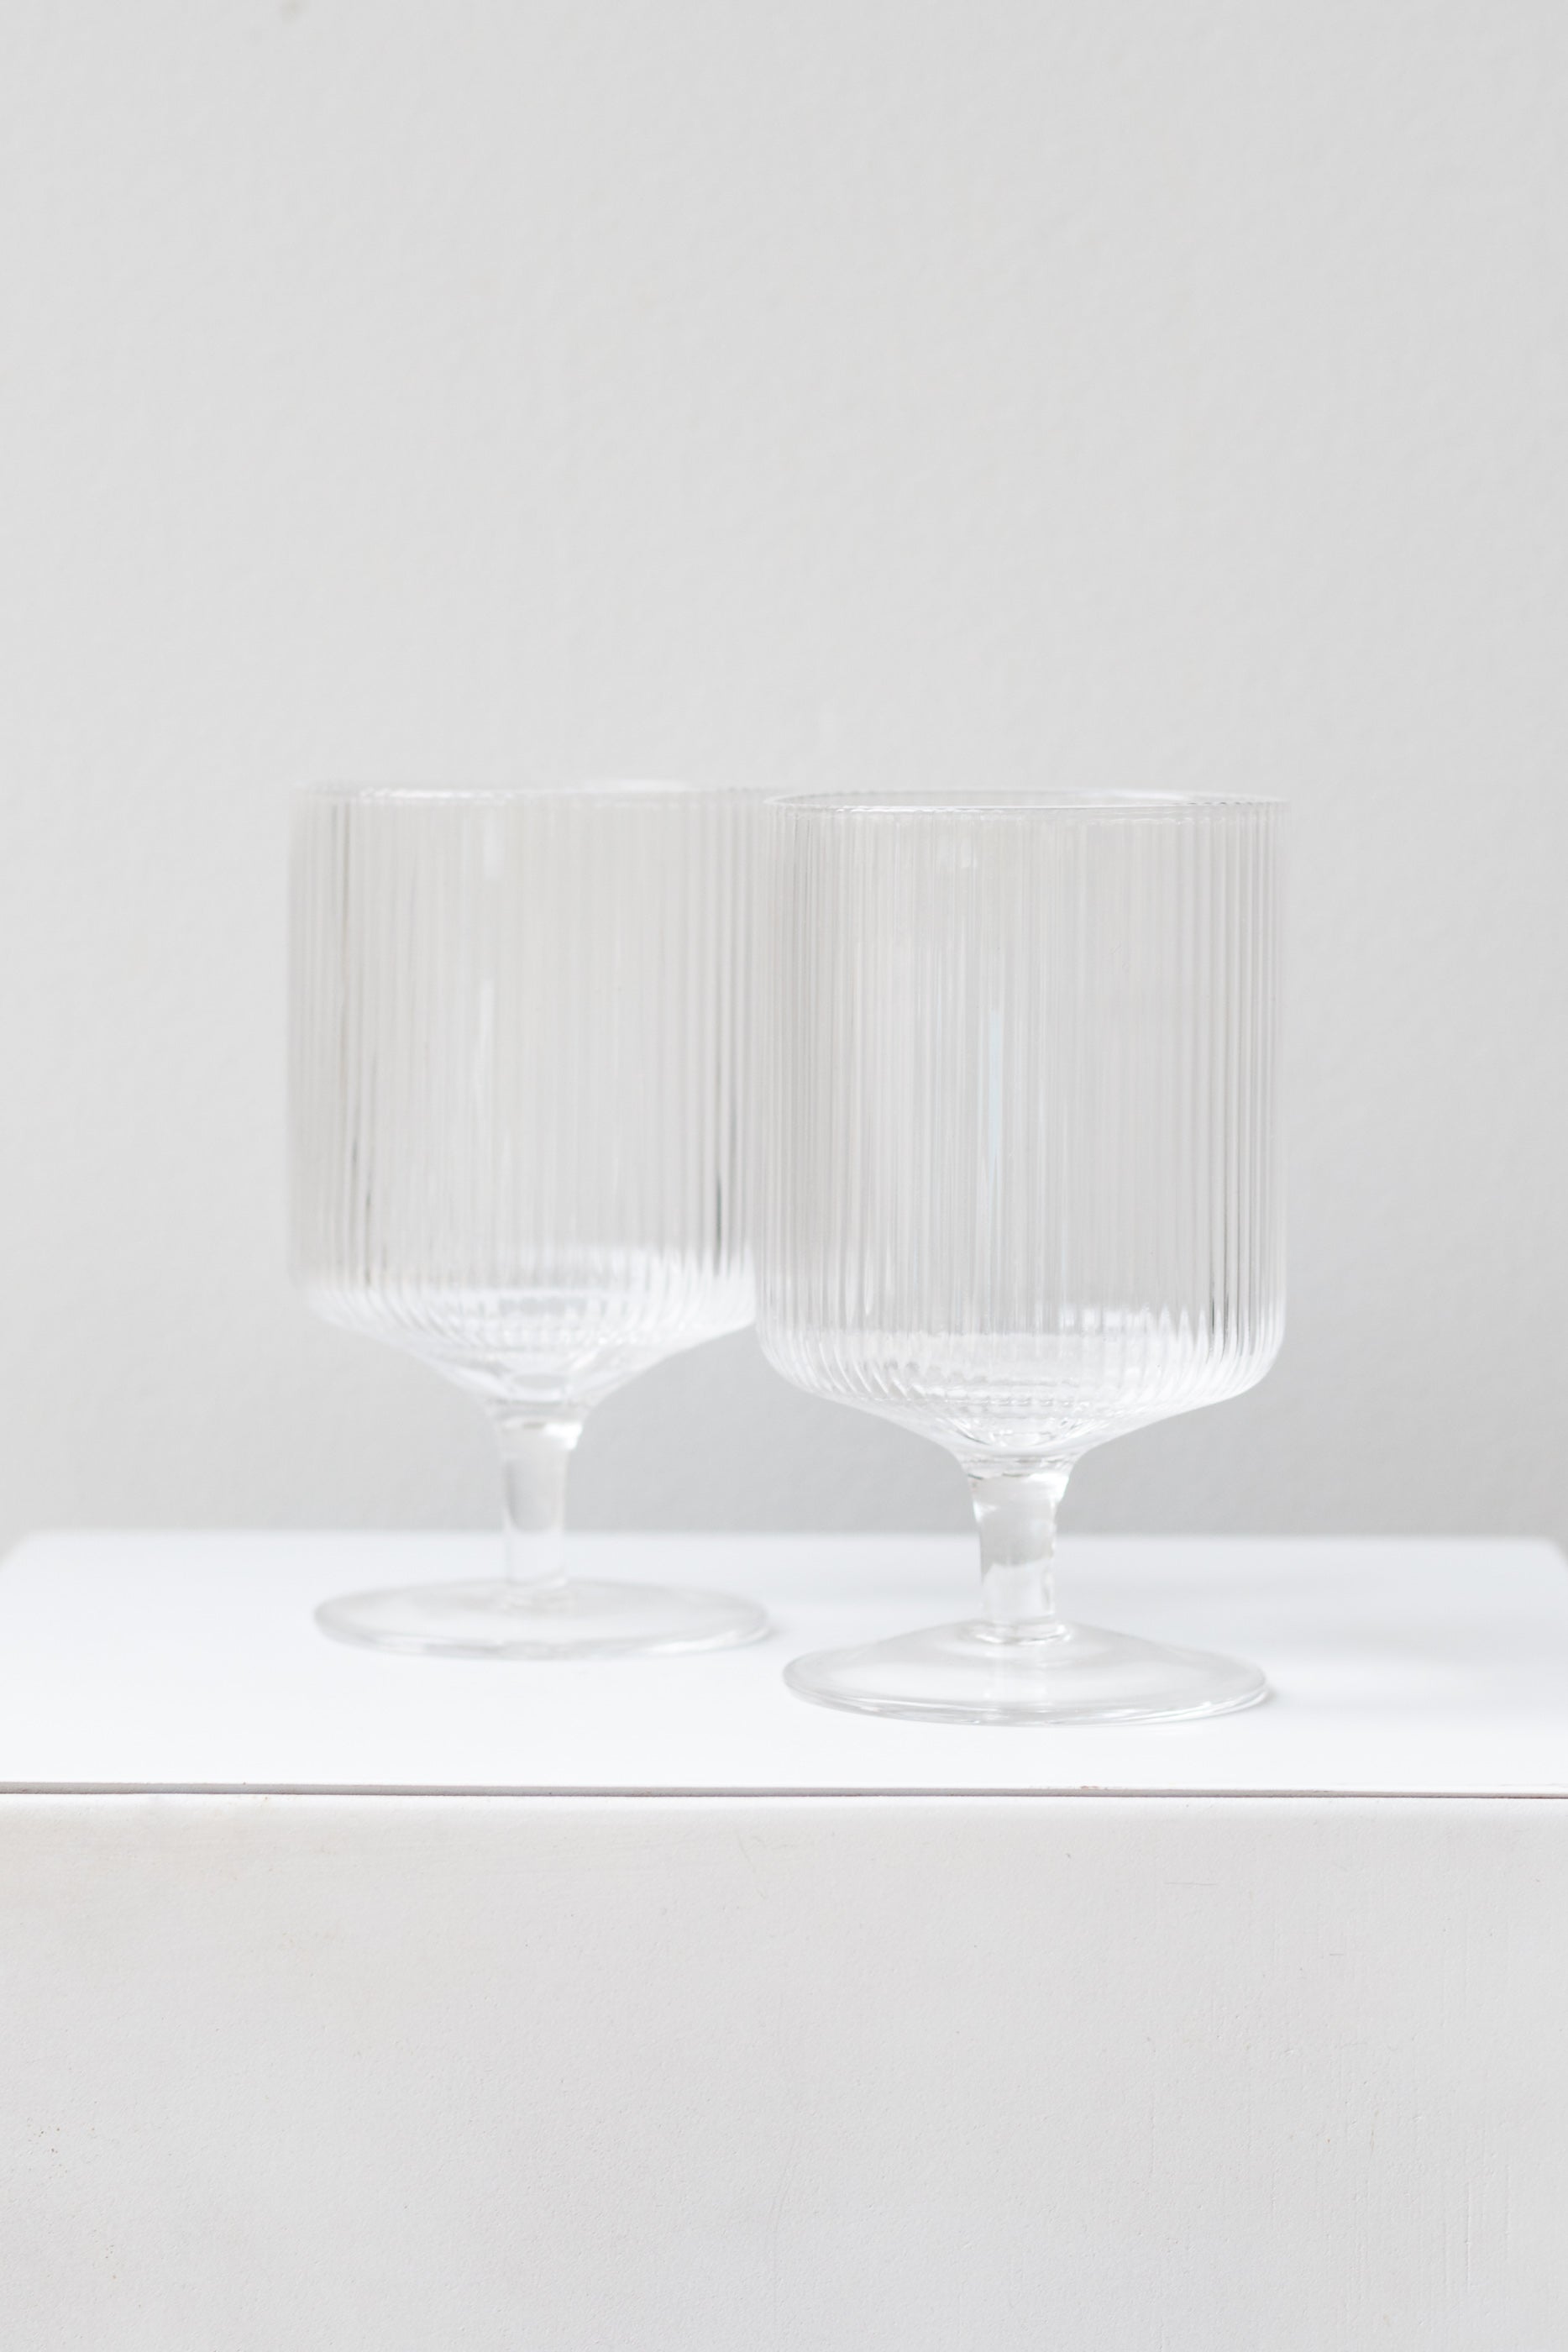 Ribbed Glasses And Coloured Wine Glasses: 11 Of The Best For Your